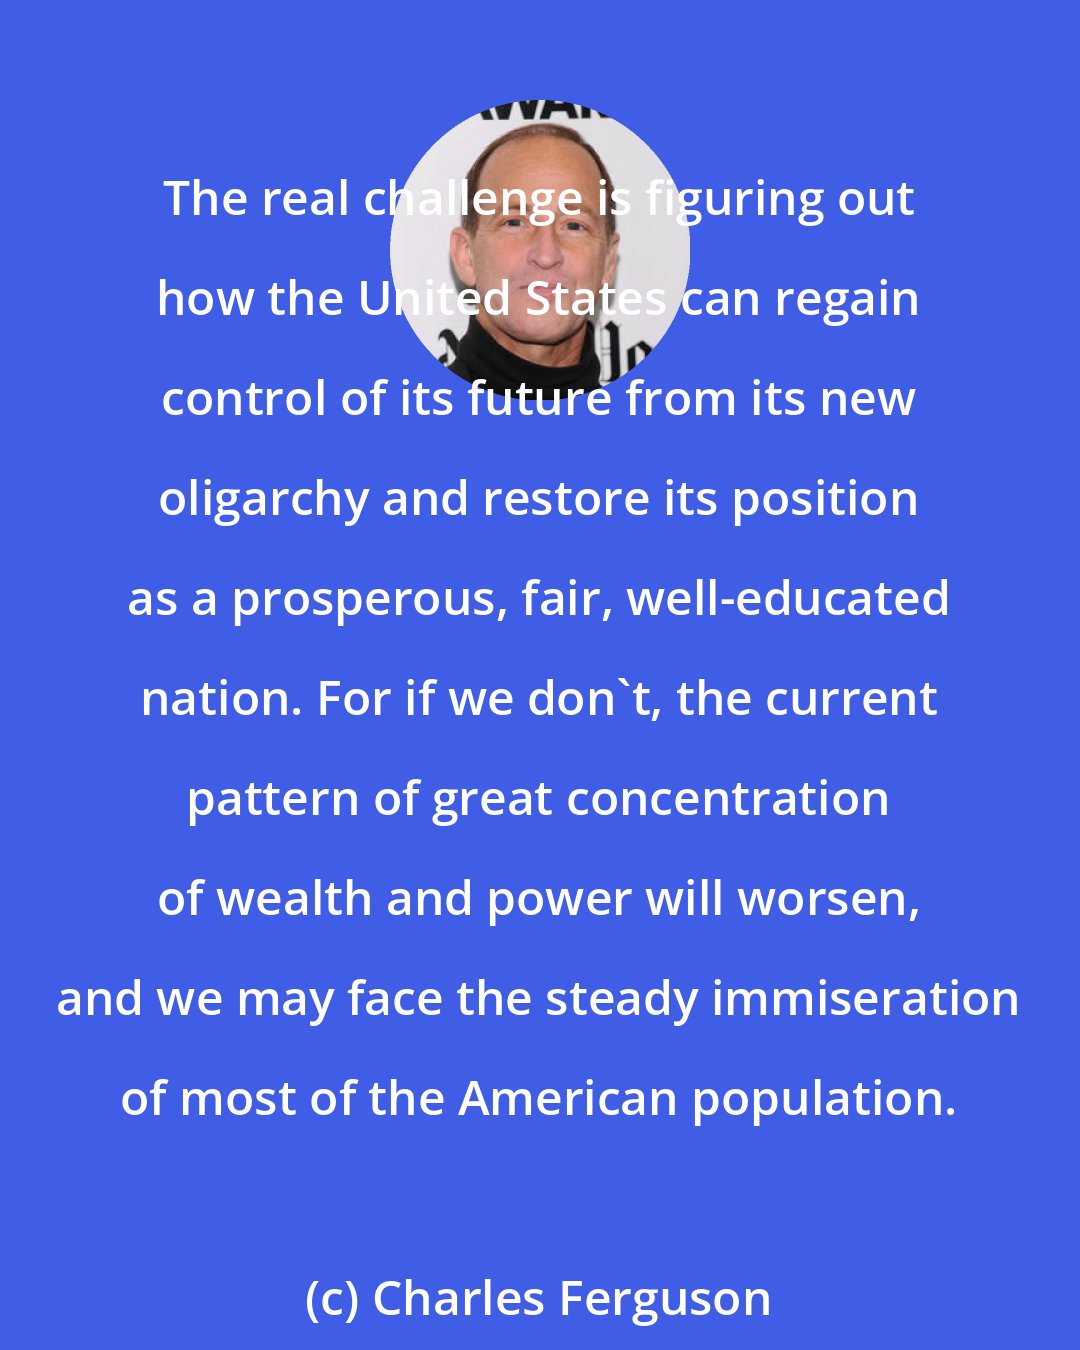 Charles Ferguson: The real challenge is figuring out how the United States can regain control of its future from its new oligarchy and restore its position as a prosperous, fair, well-educated nation. For if we don't, the current pattern of great concentration of wealth and power will worsen, and we may face the steady immiseration of most of the American population.